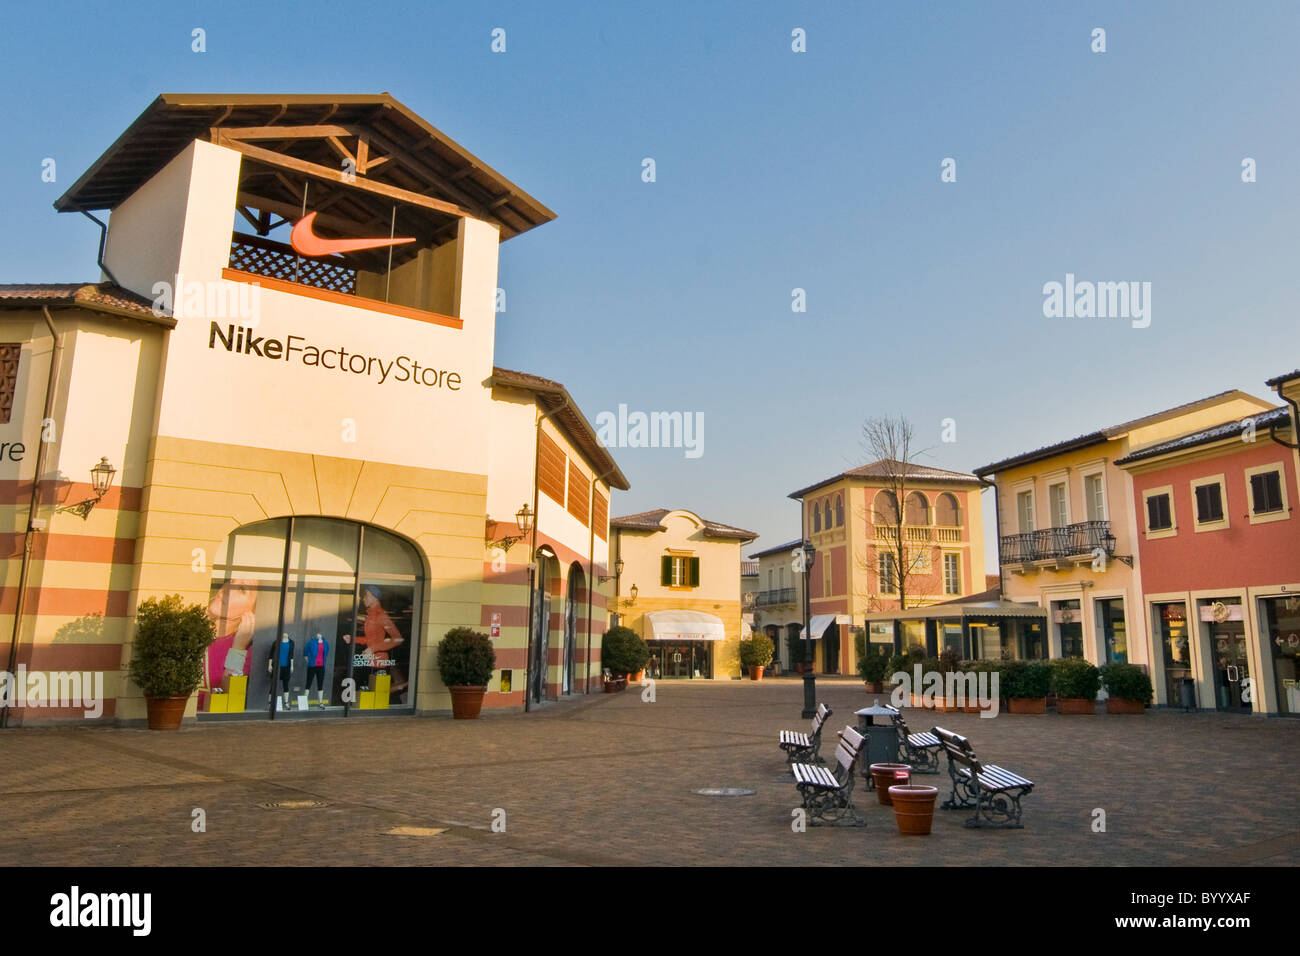 Nike factory store, Designer outlet, Serravalle Scrivia, Alessandria Stock Photo, Royalty Free ...